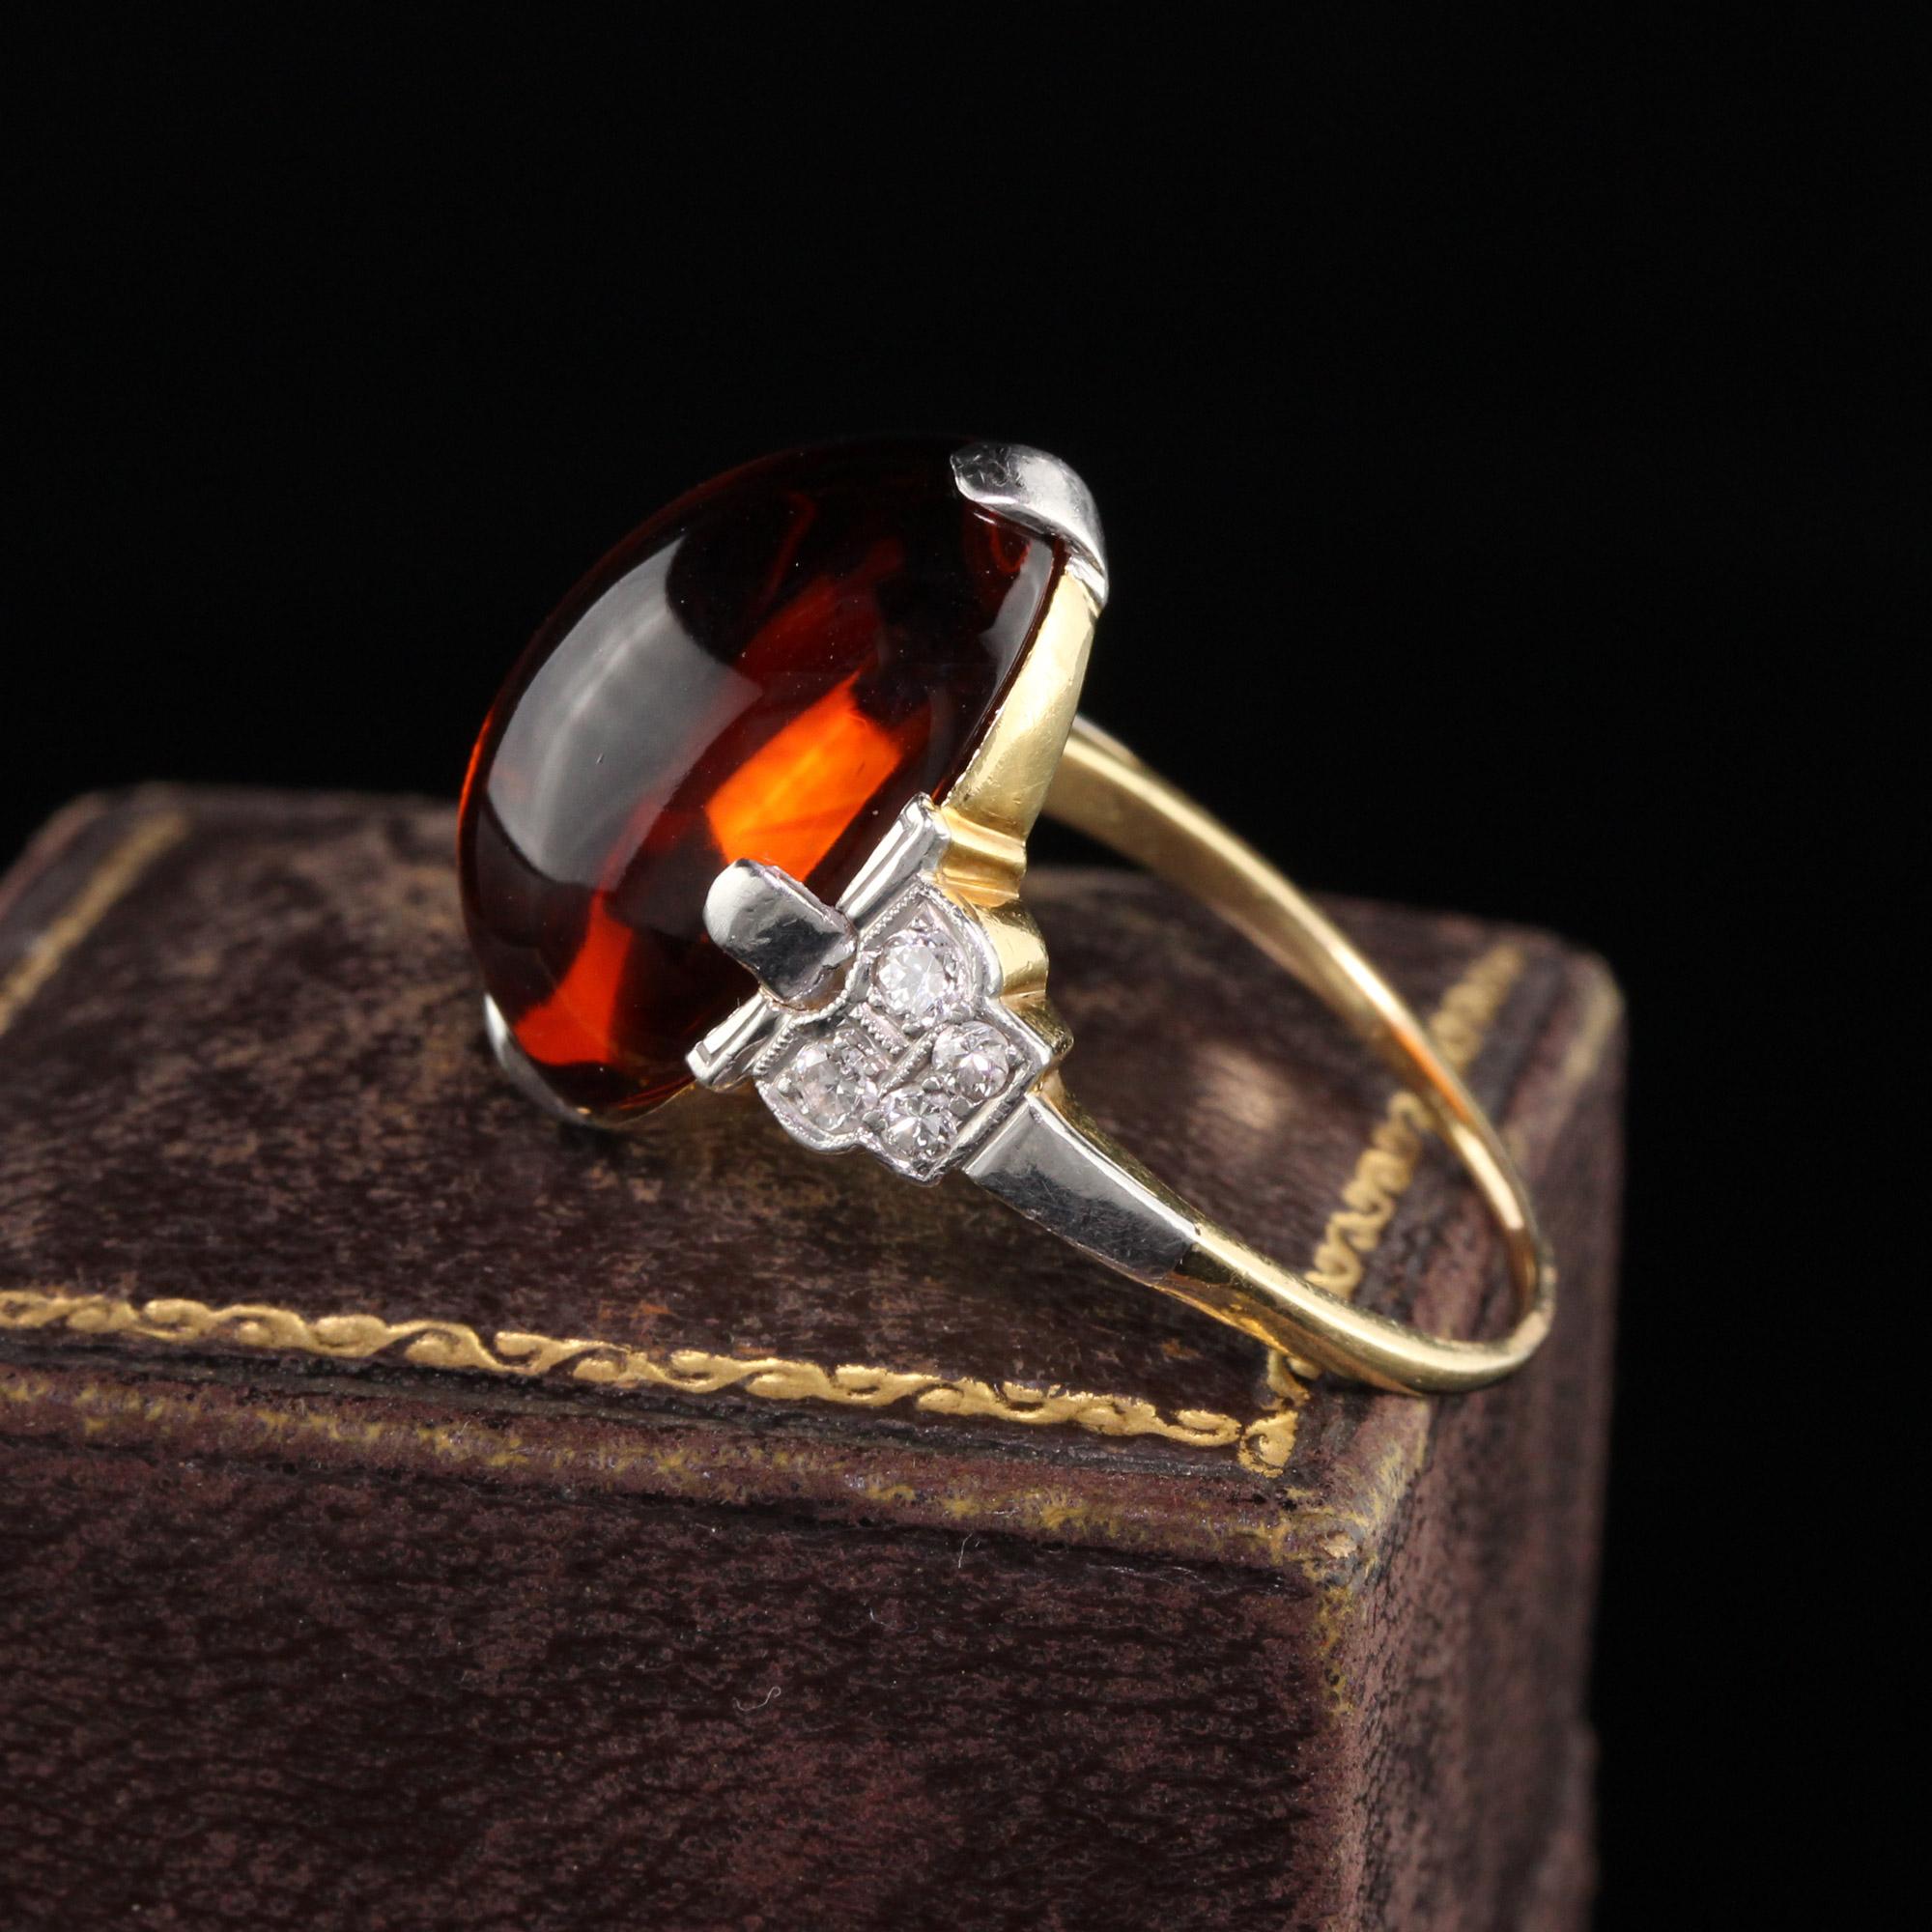 Gorgeous Antique Art Deco 14K Yellow Gold and Platinum Madeira Citrine Diamond Ring. This beautiful ring is all original with an exceptionally rare Madeira Citrine which is a golden orange color and extremely clean. The ring is beautifully made and